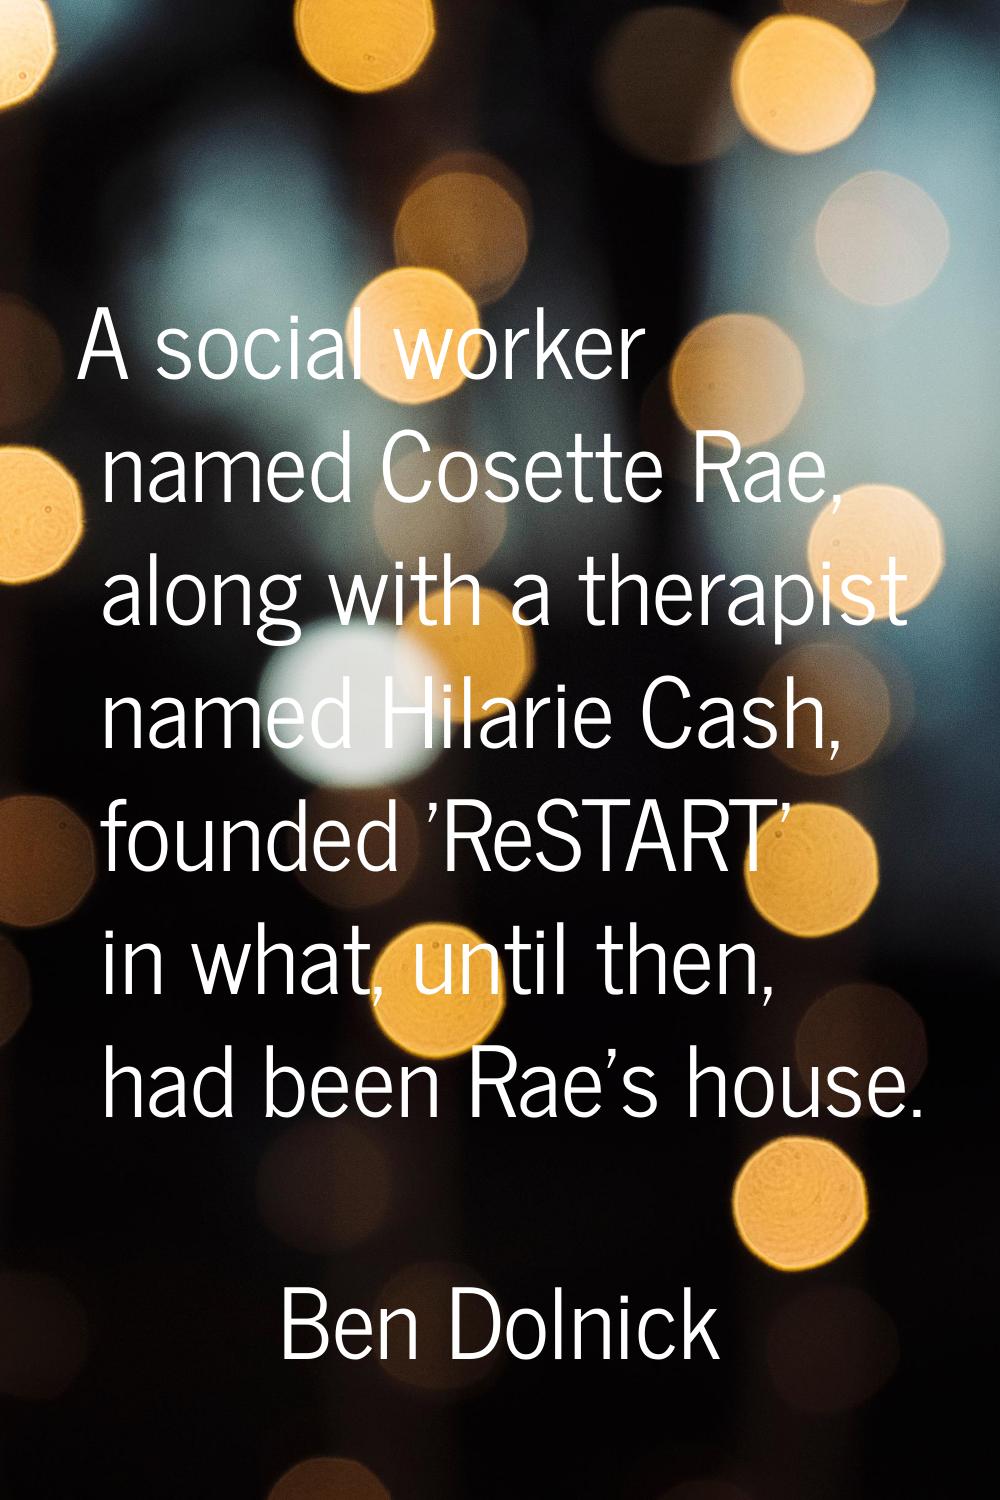 A social worker named Cosette Rae, along with a therapist named Hilarie Cash, founded 'ReSTART' in 